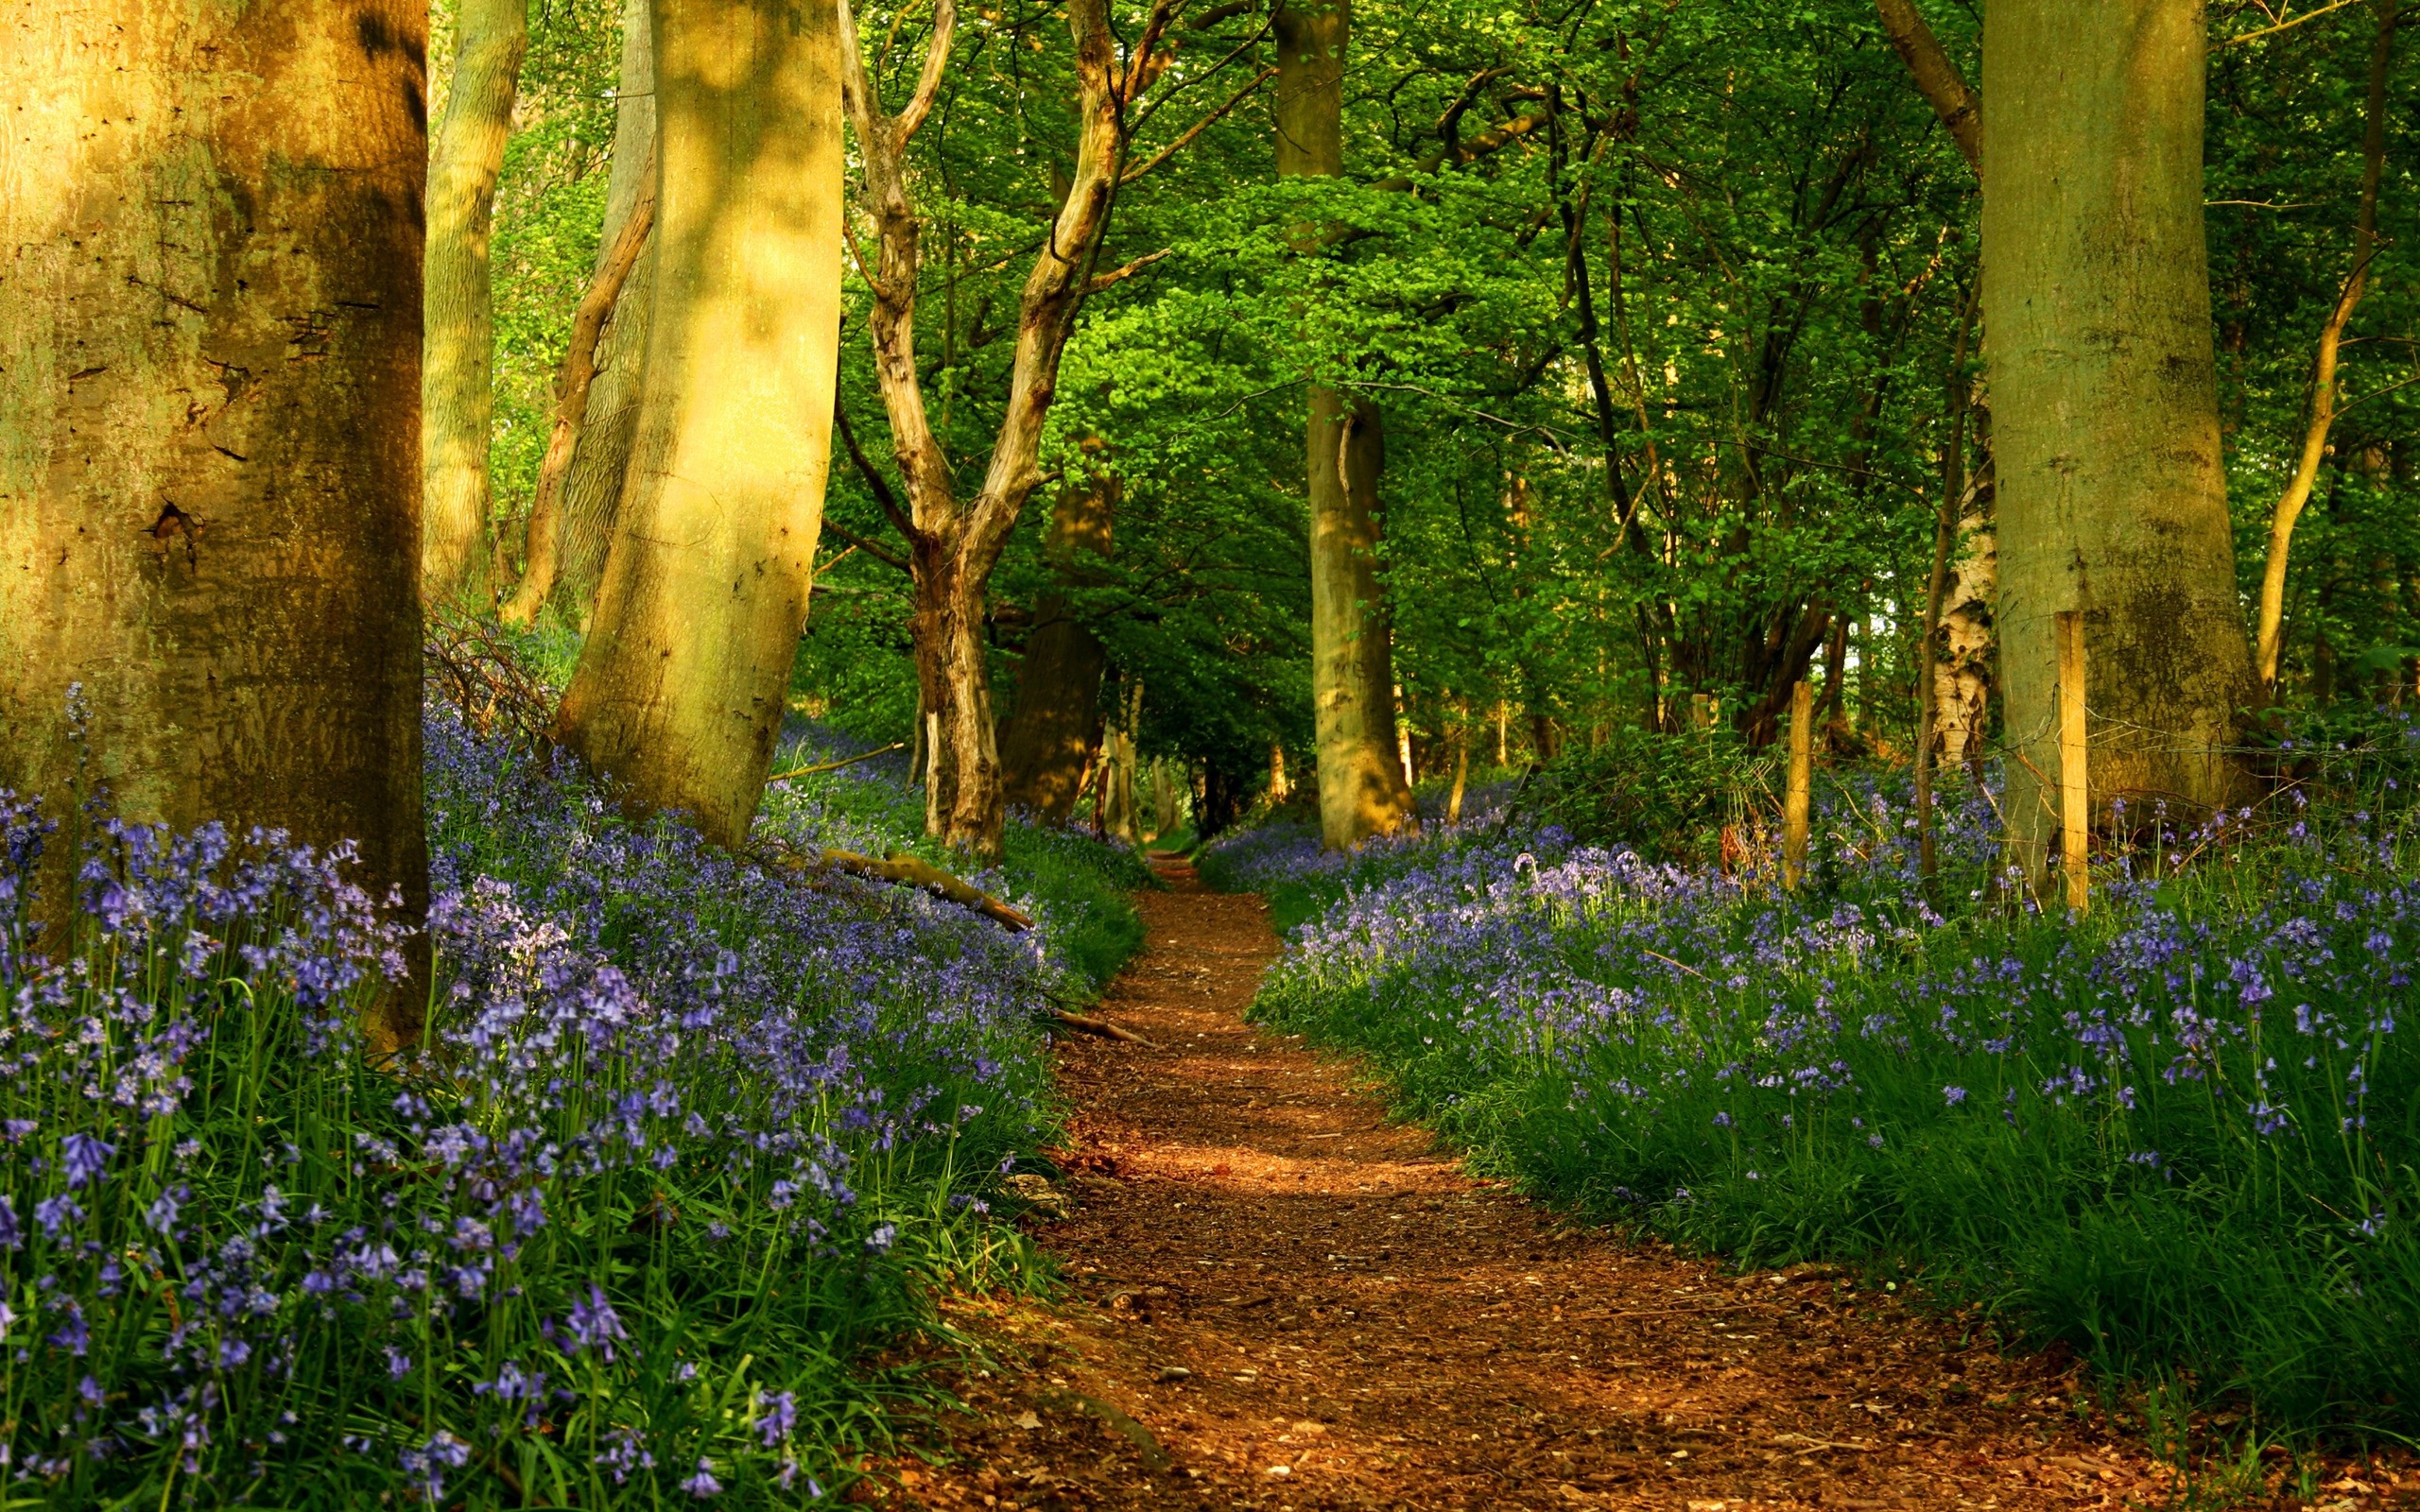  Spring Forest Wallpaper Download Wallpaper with 2560x1600 Resolution